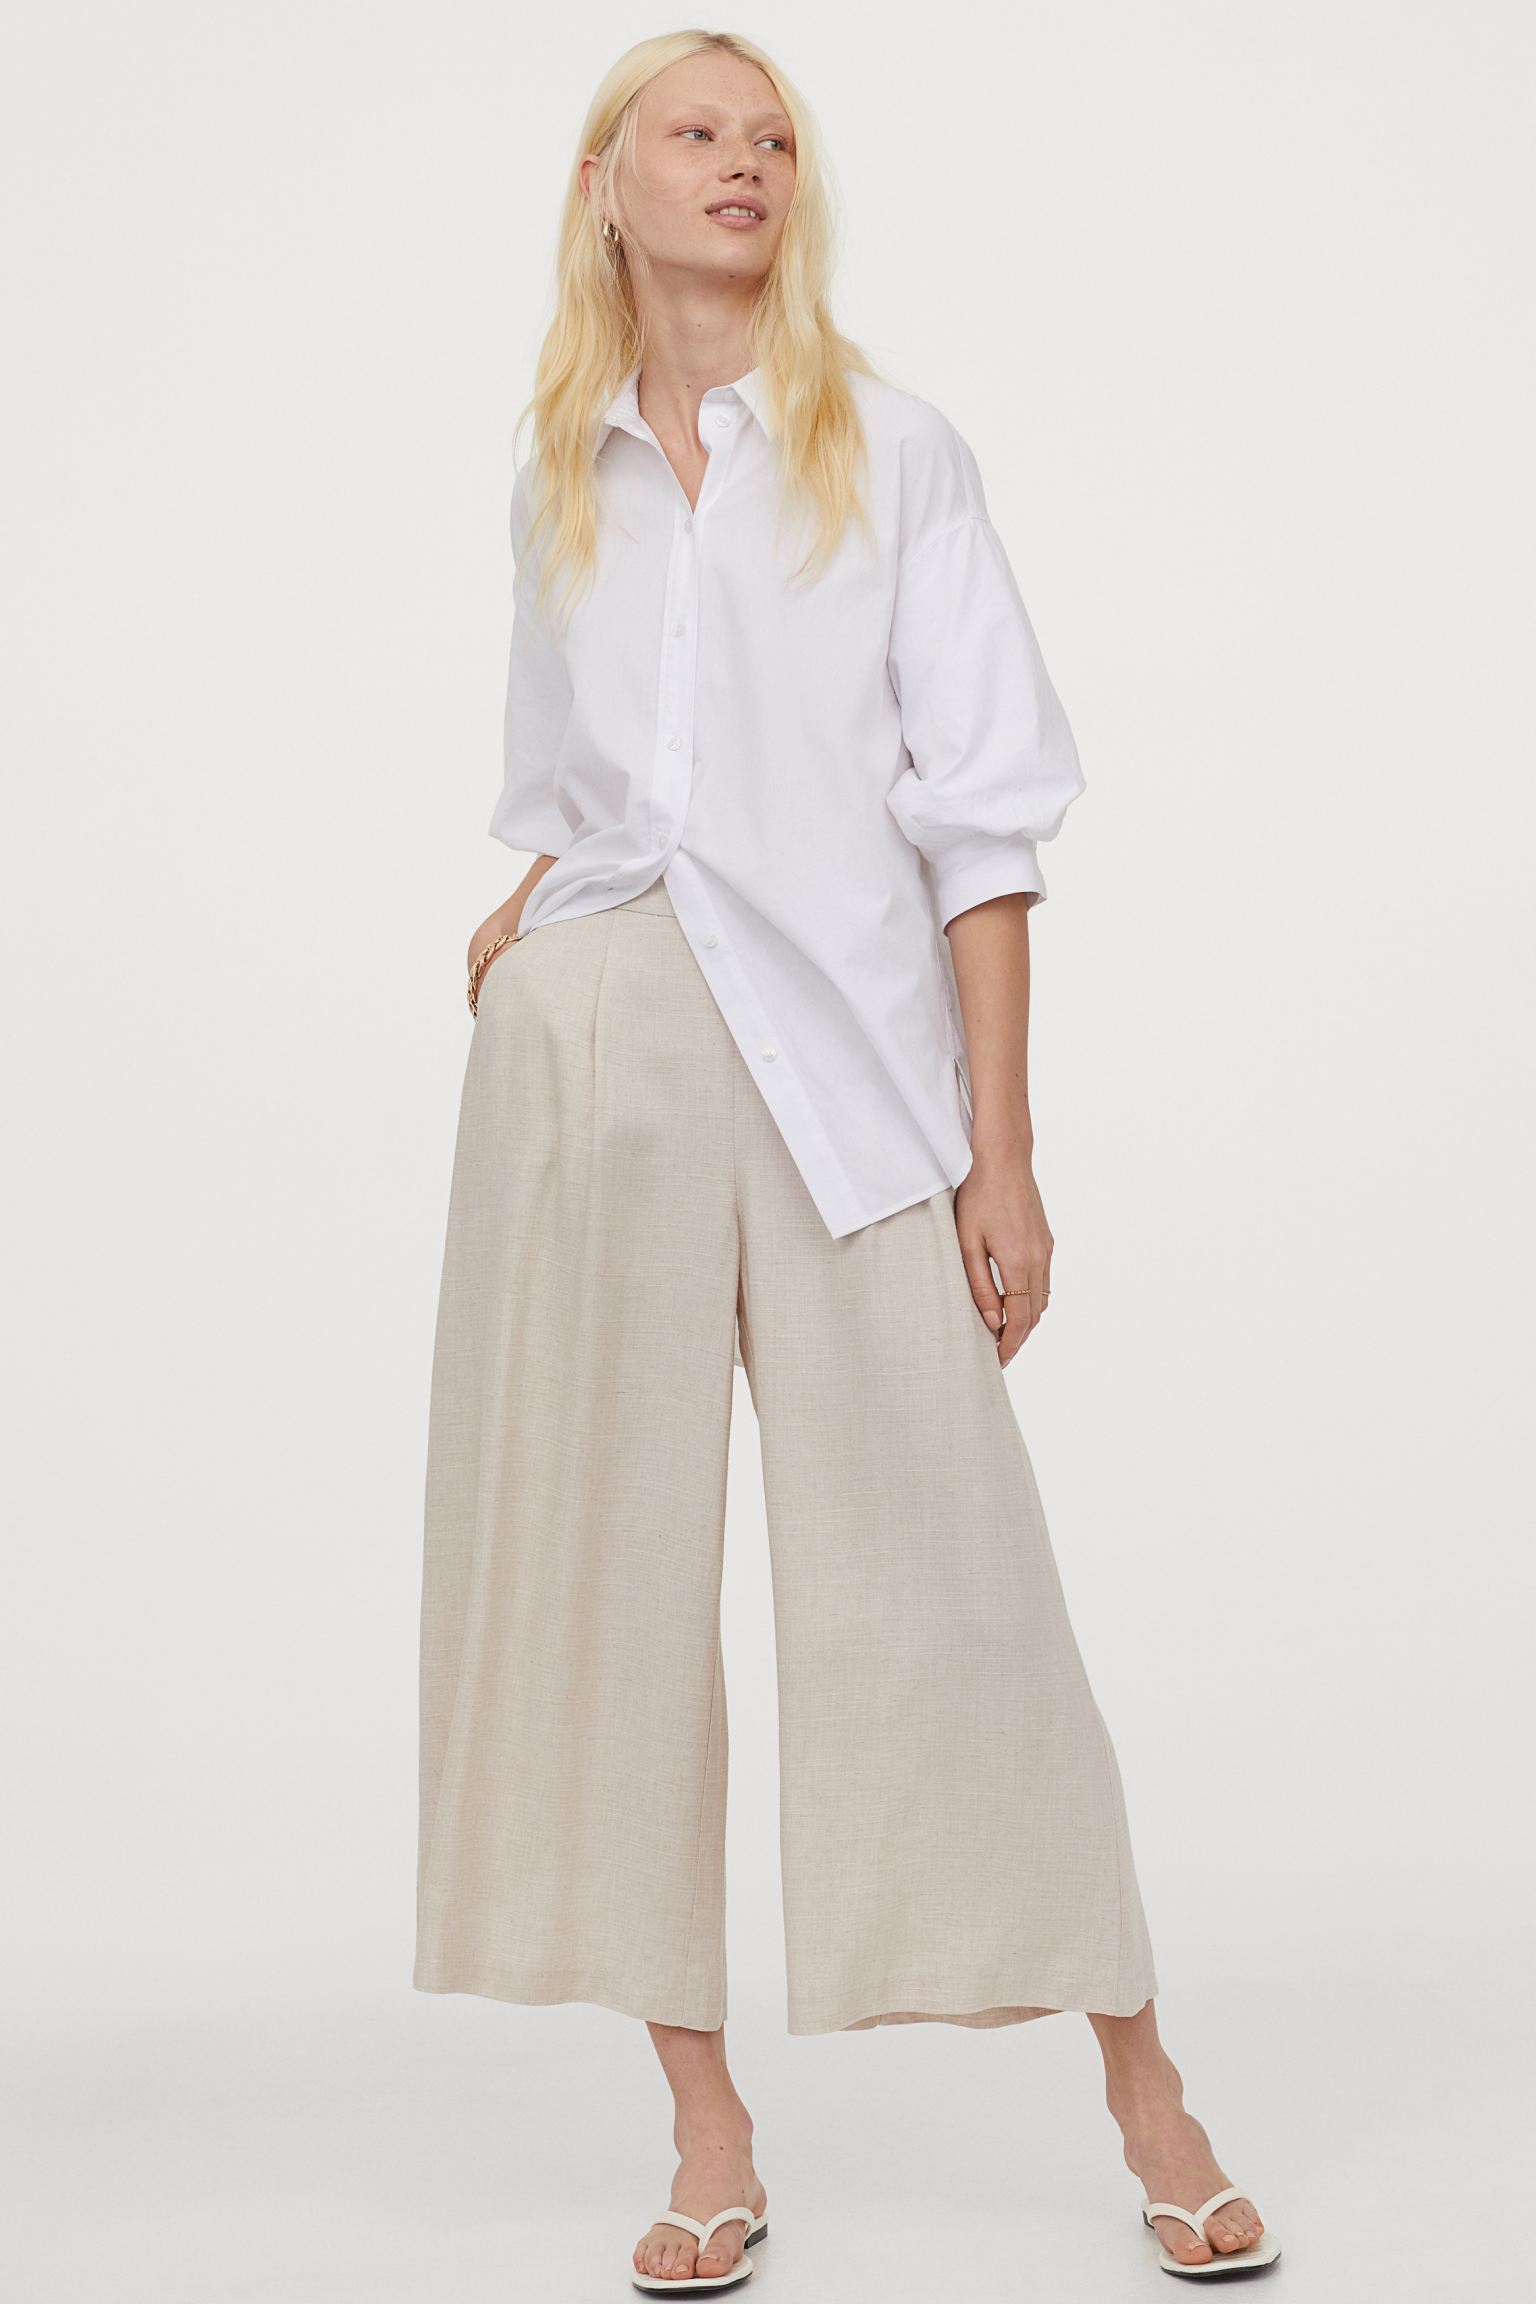 WOCACHI Casual Pants for Women Solid Linen Button Elastic Waist Roll Up Trousers Summer Cropped Palazzo Capris Pants 